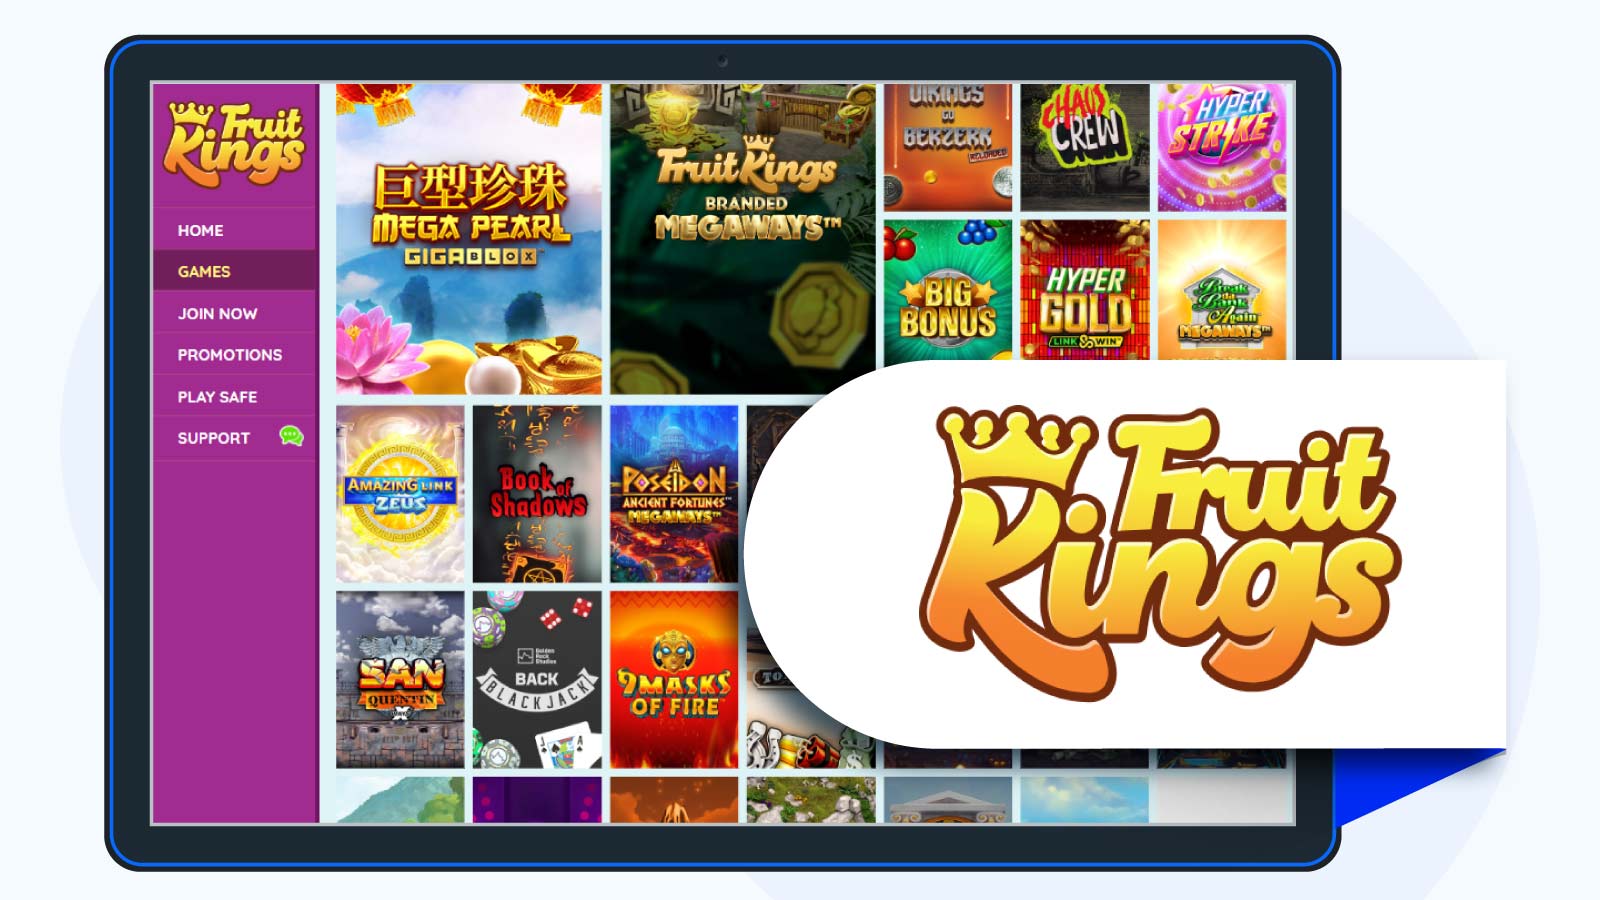 FruitKings Casino UK Players’ Favourite Casino for Welcome Bonuses